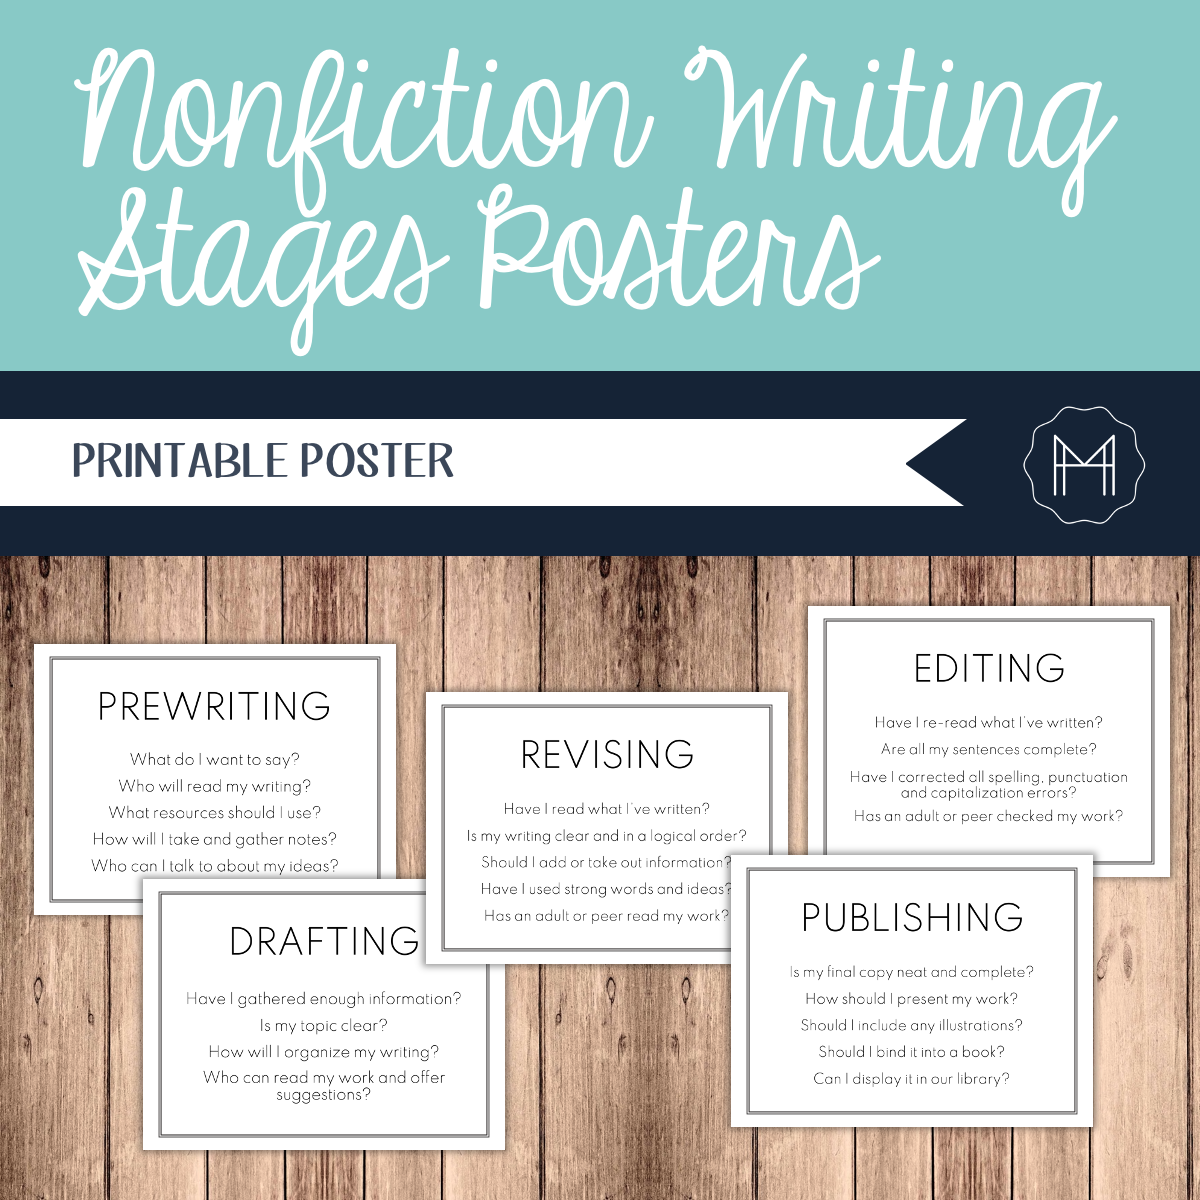 Nonfiction Writing Stages Posters